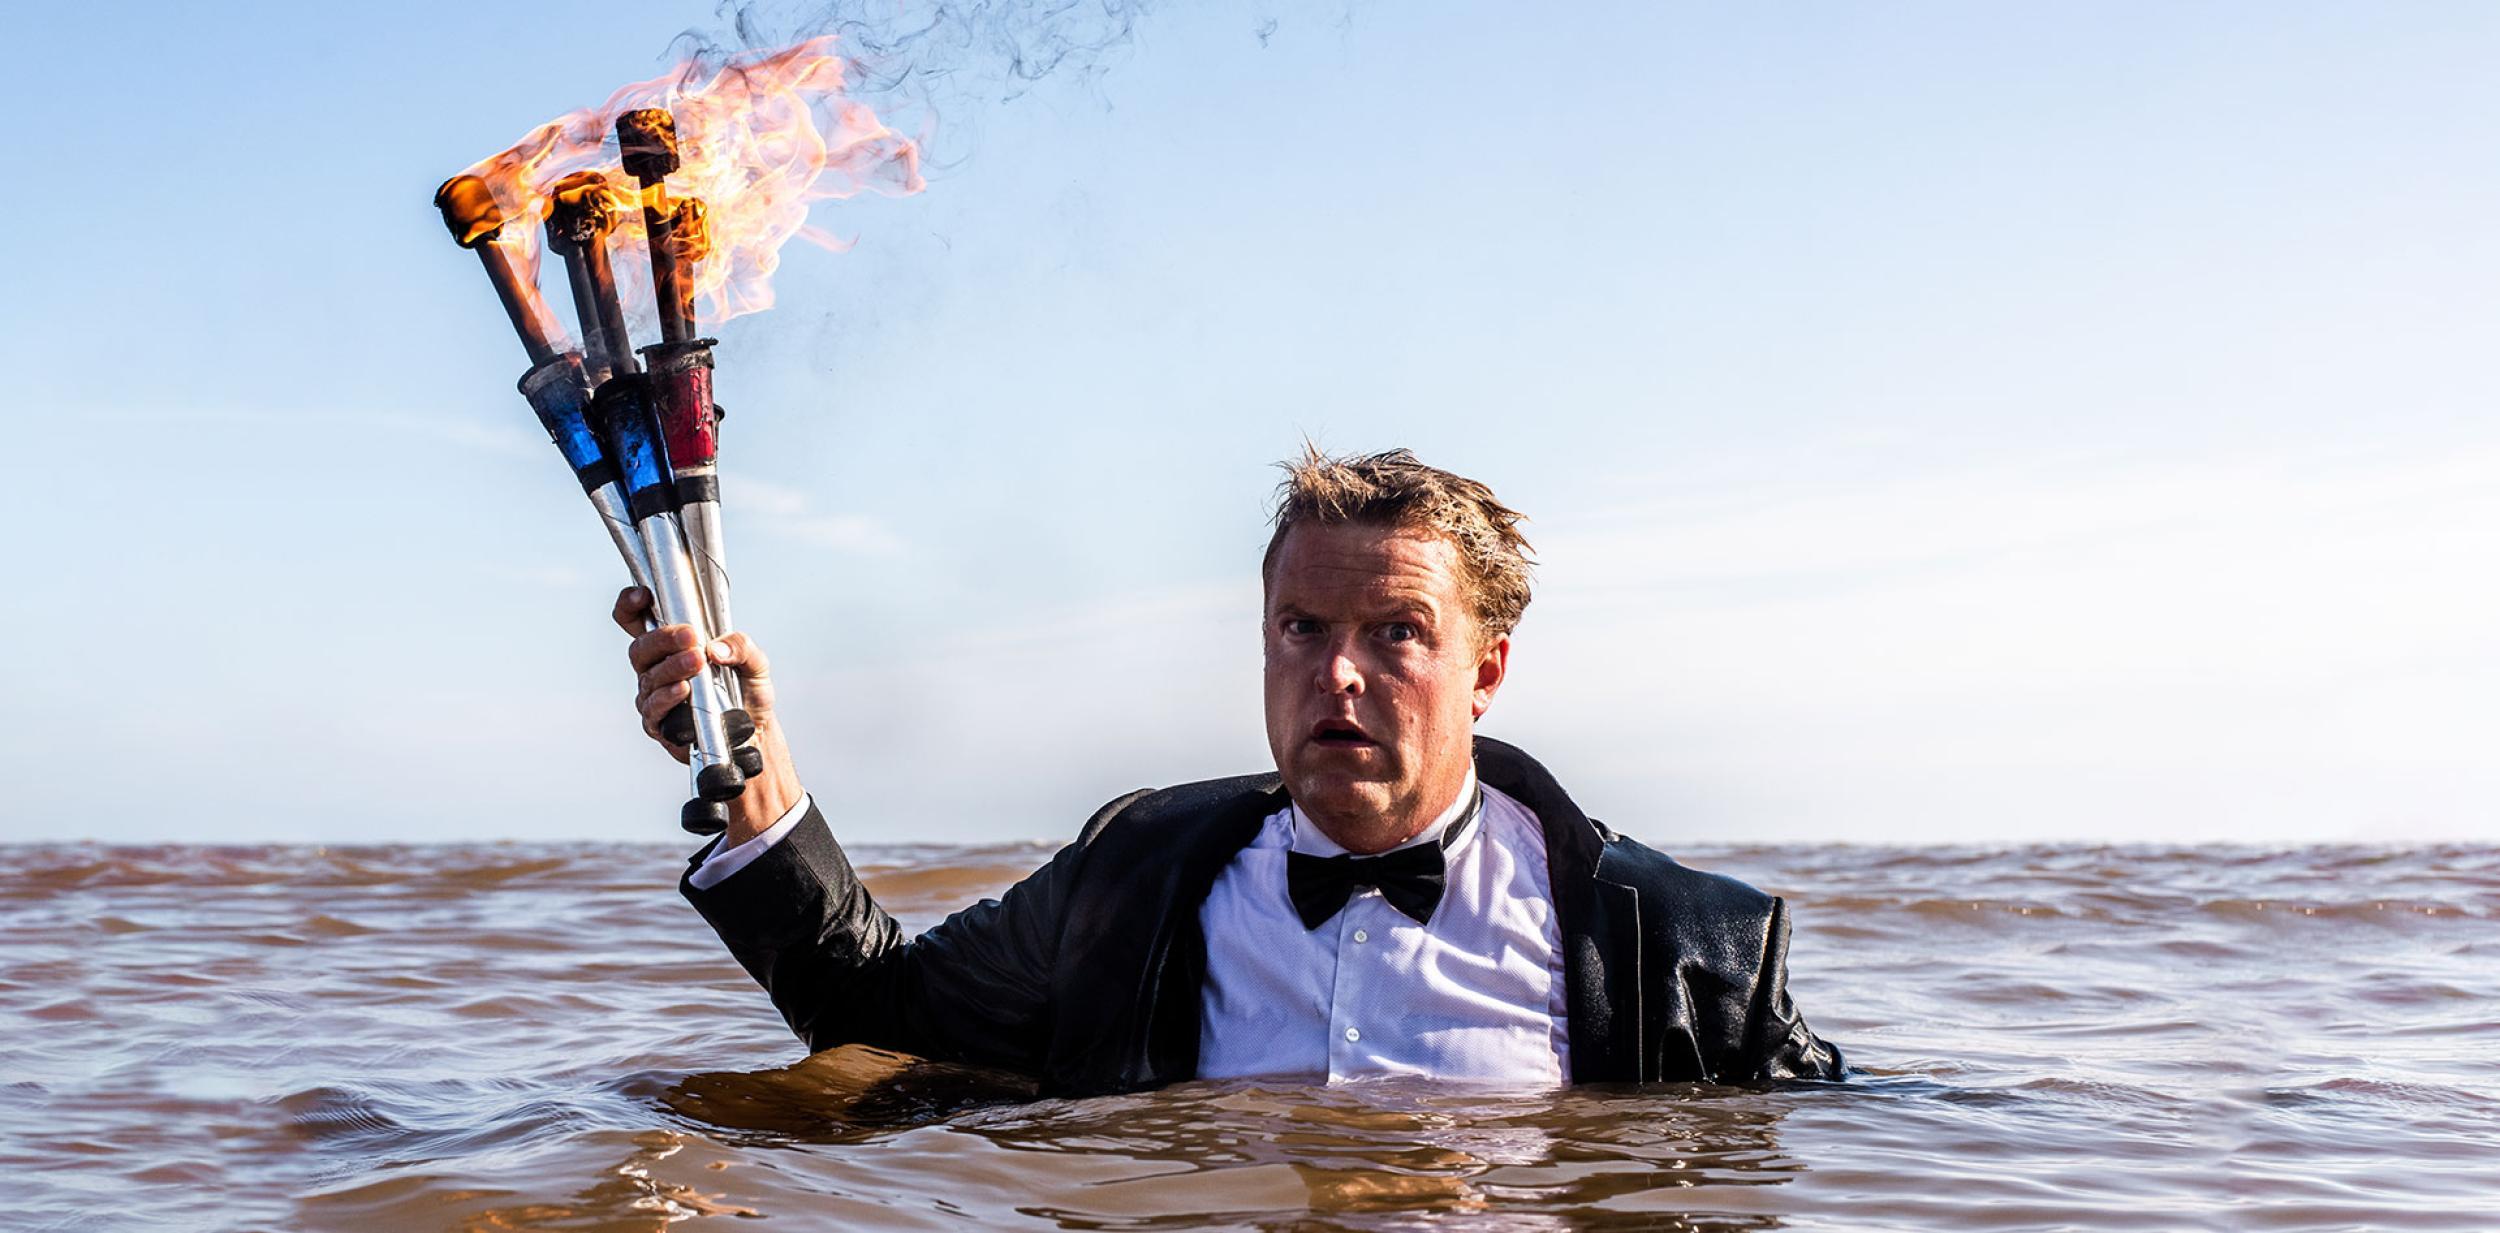 Person in the sea with flaming juggling clubs